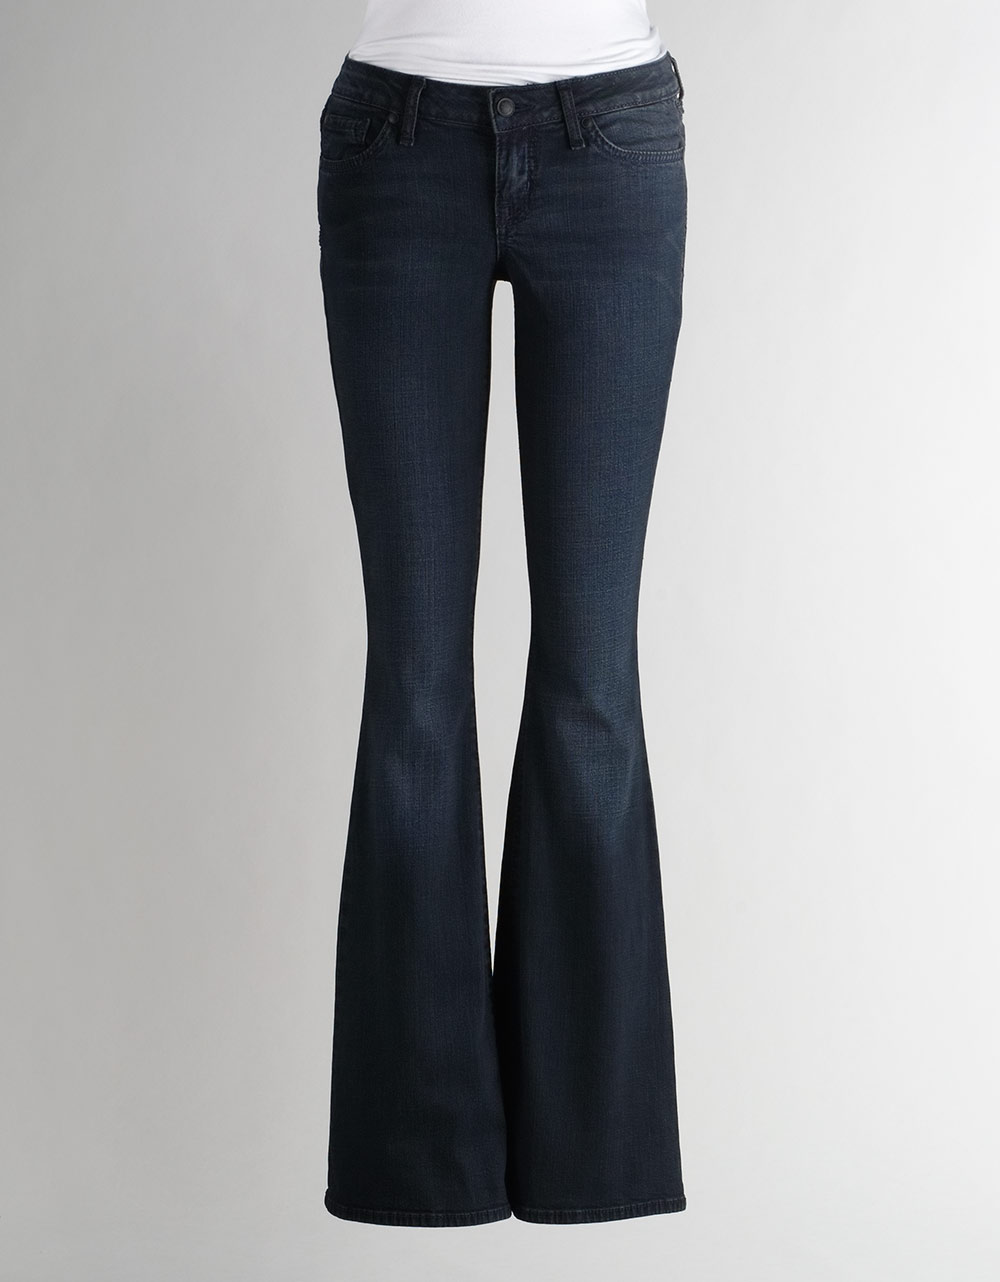 Jessica Simpson Sassy Low Rise Skinny Flare Jeans in Black - Lyst